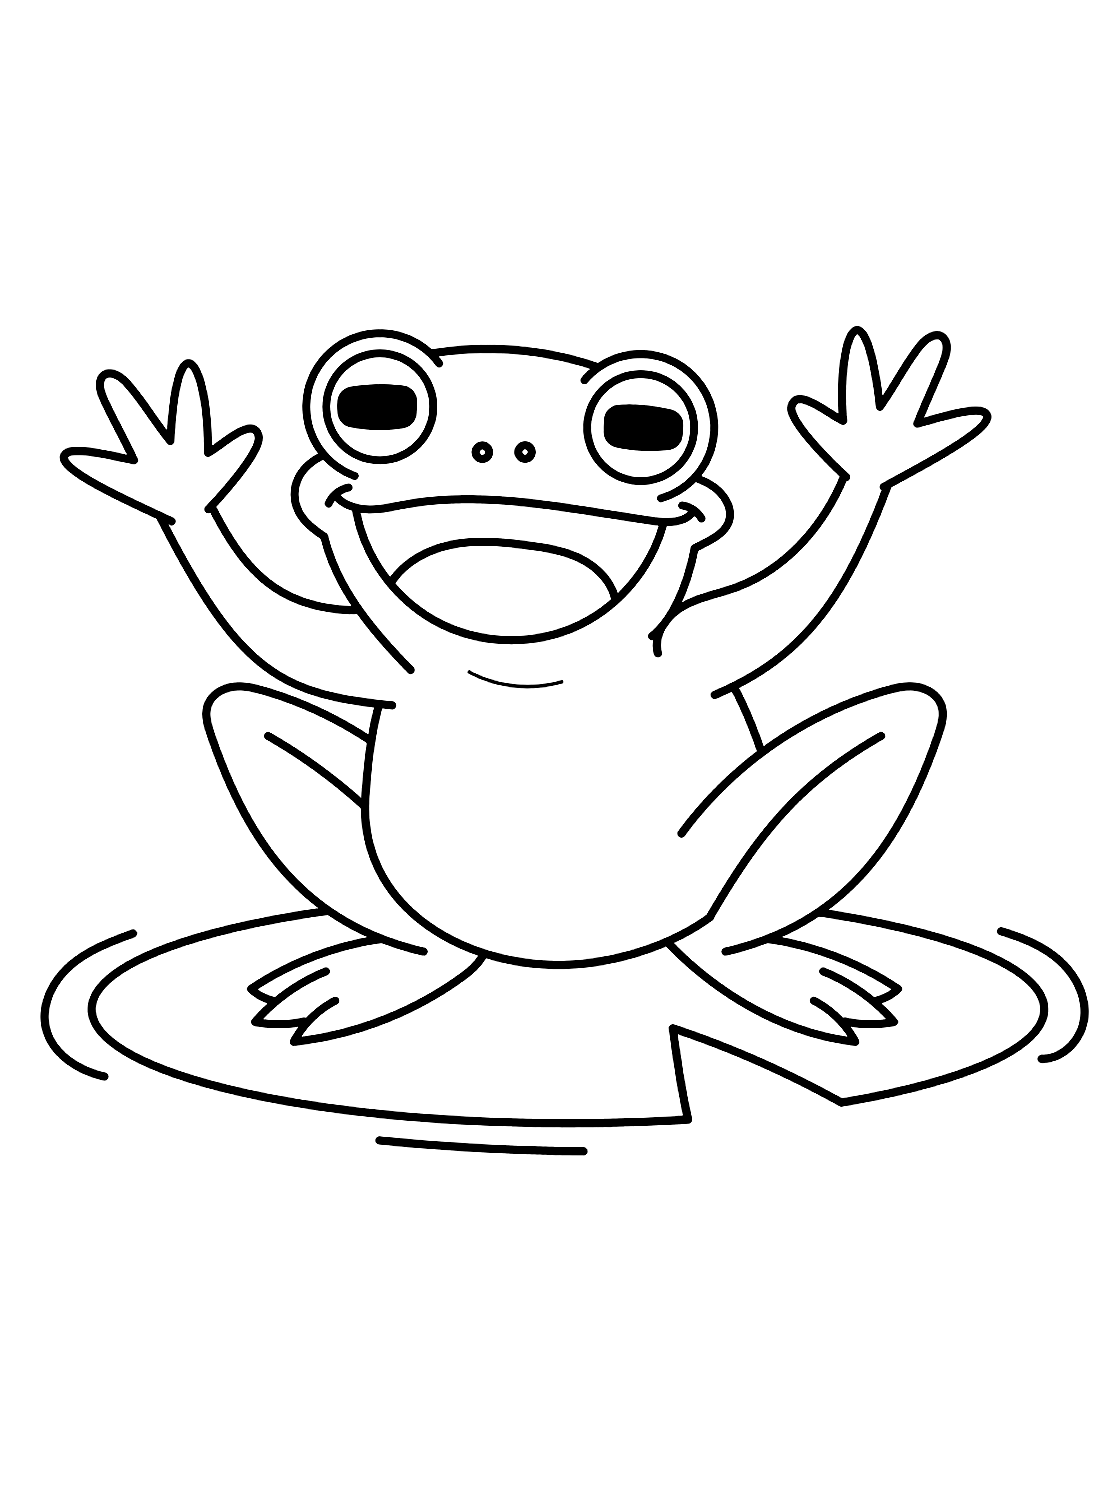 Frog to color from Frog